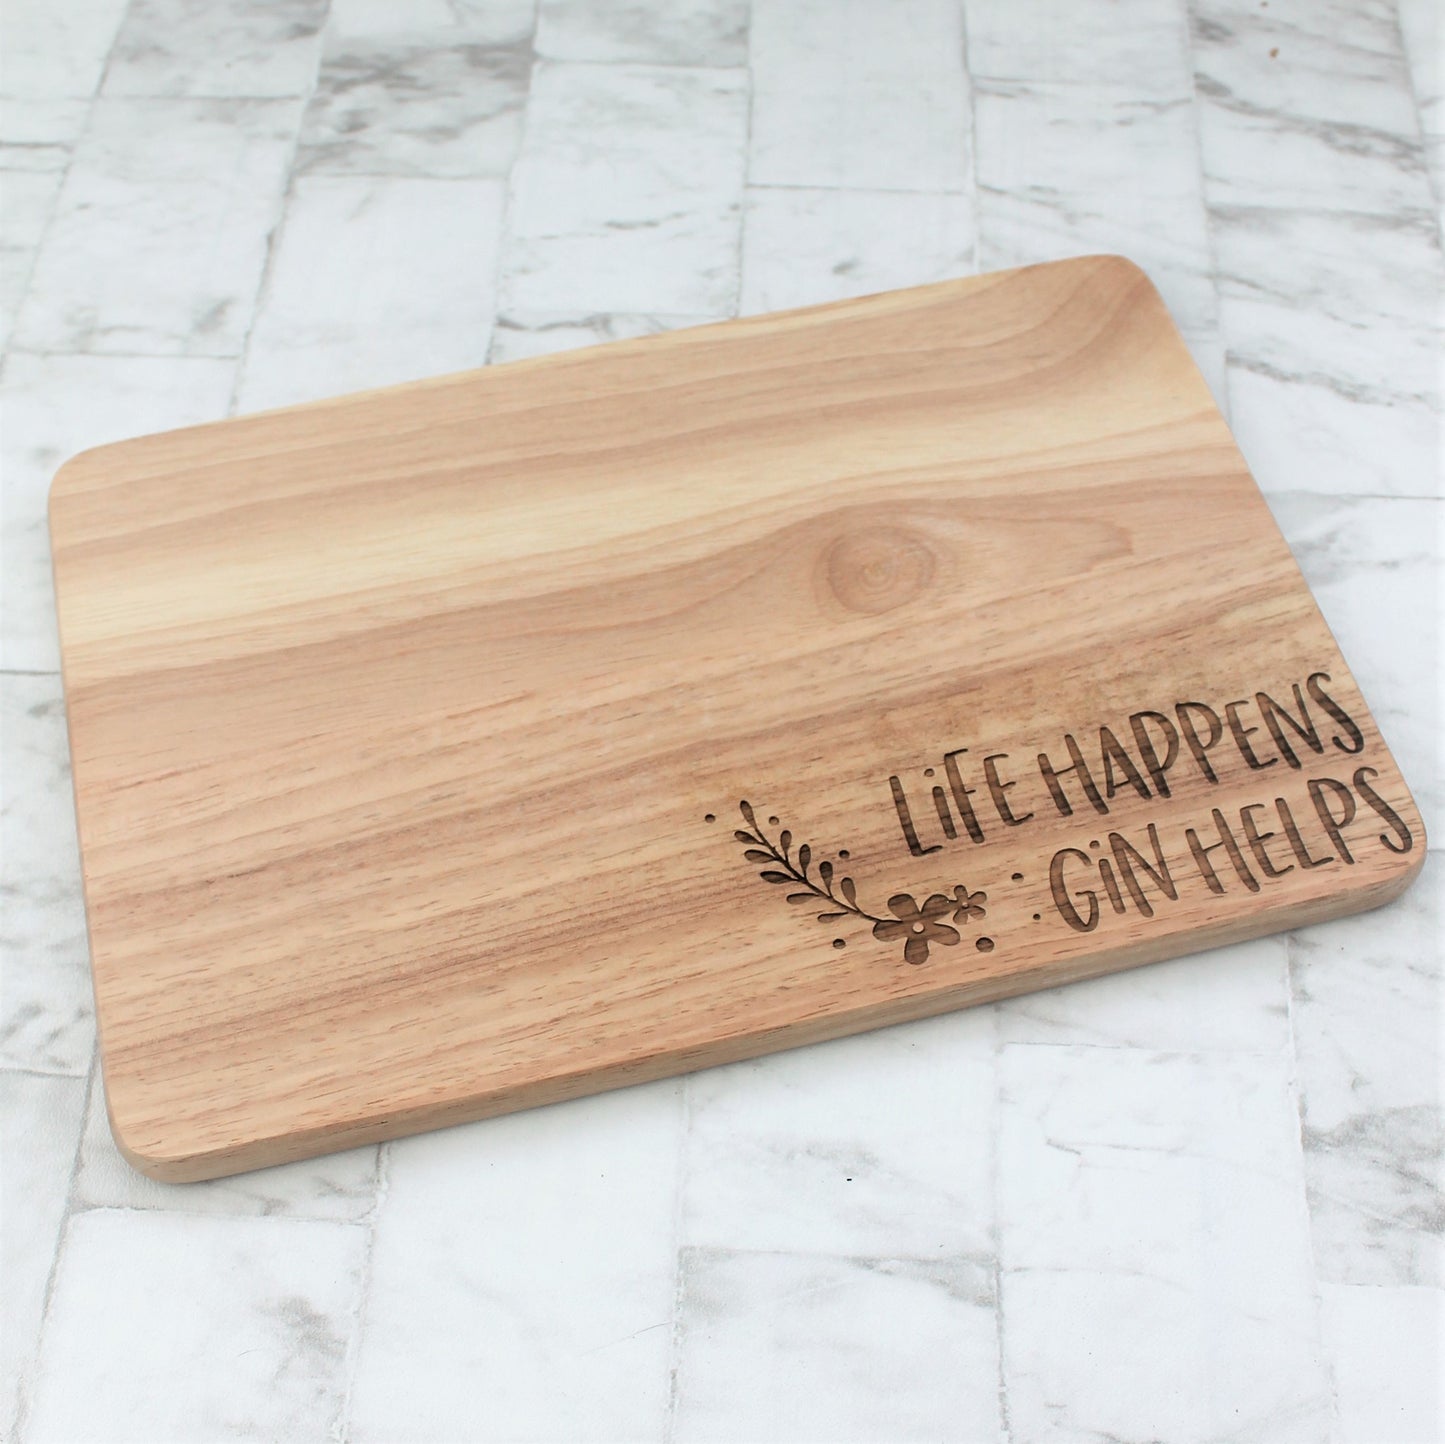 Wooden engraved chopping board for gin lover, perfect for bar